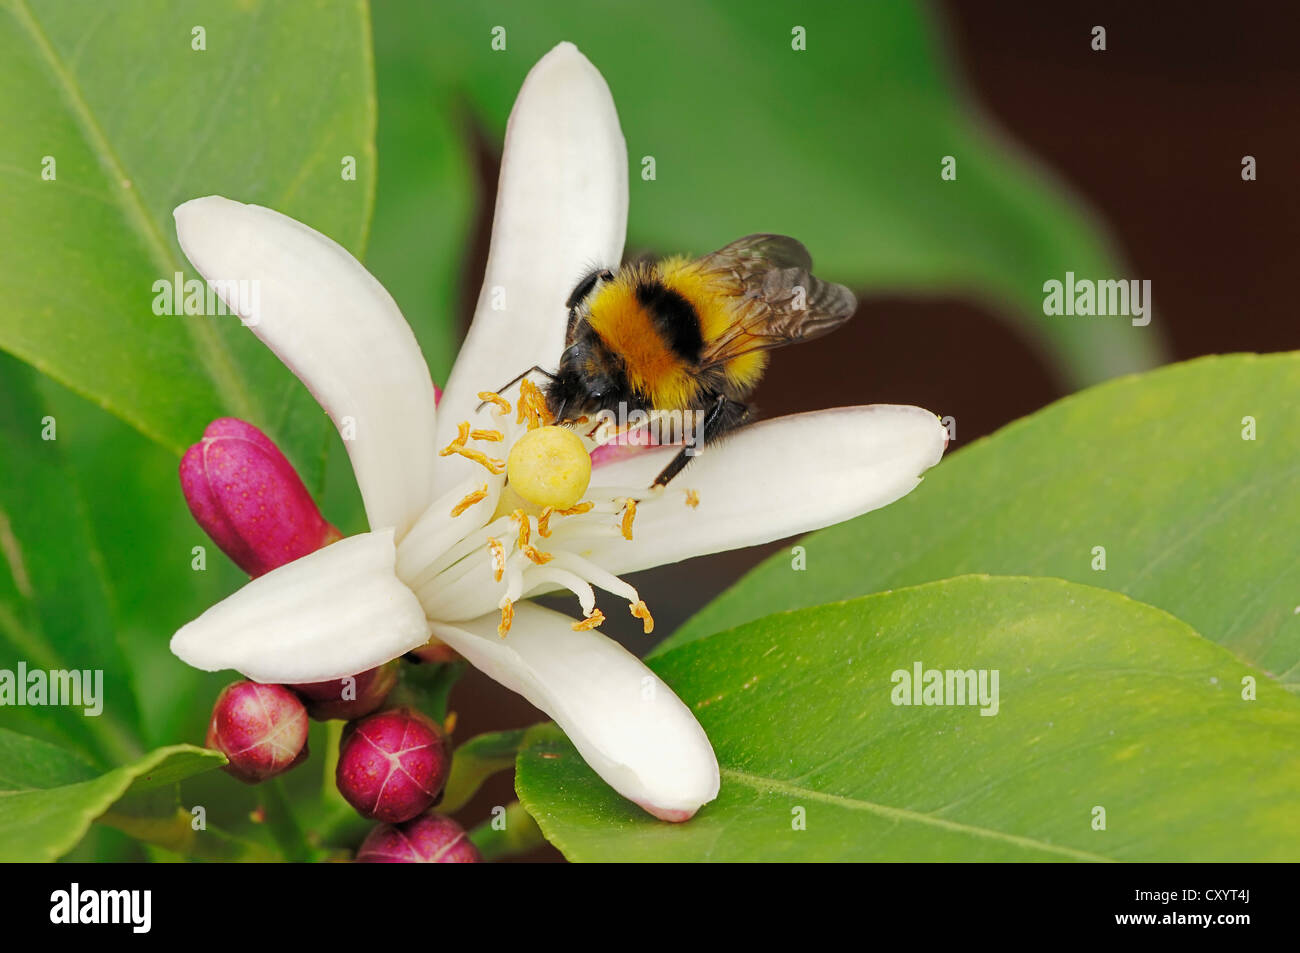 Lemon tree (Citrus limon), bumble bee perched on a blossom, ornamental plant and crop plant, North Rhine-Westphalia Stock Photo